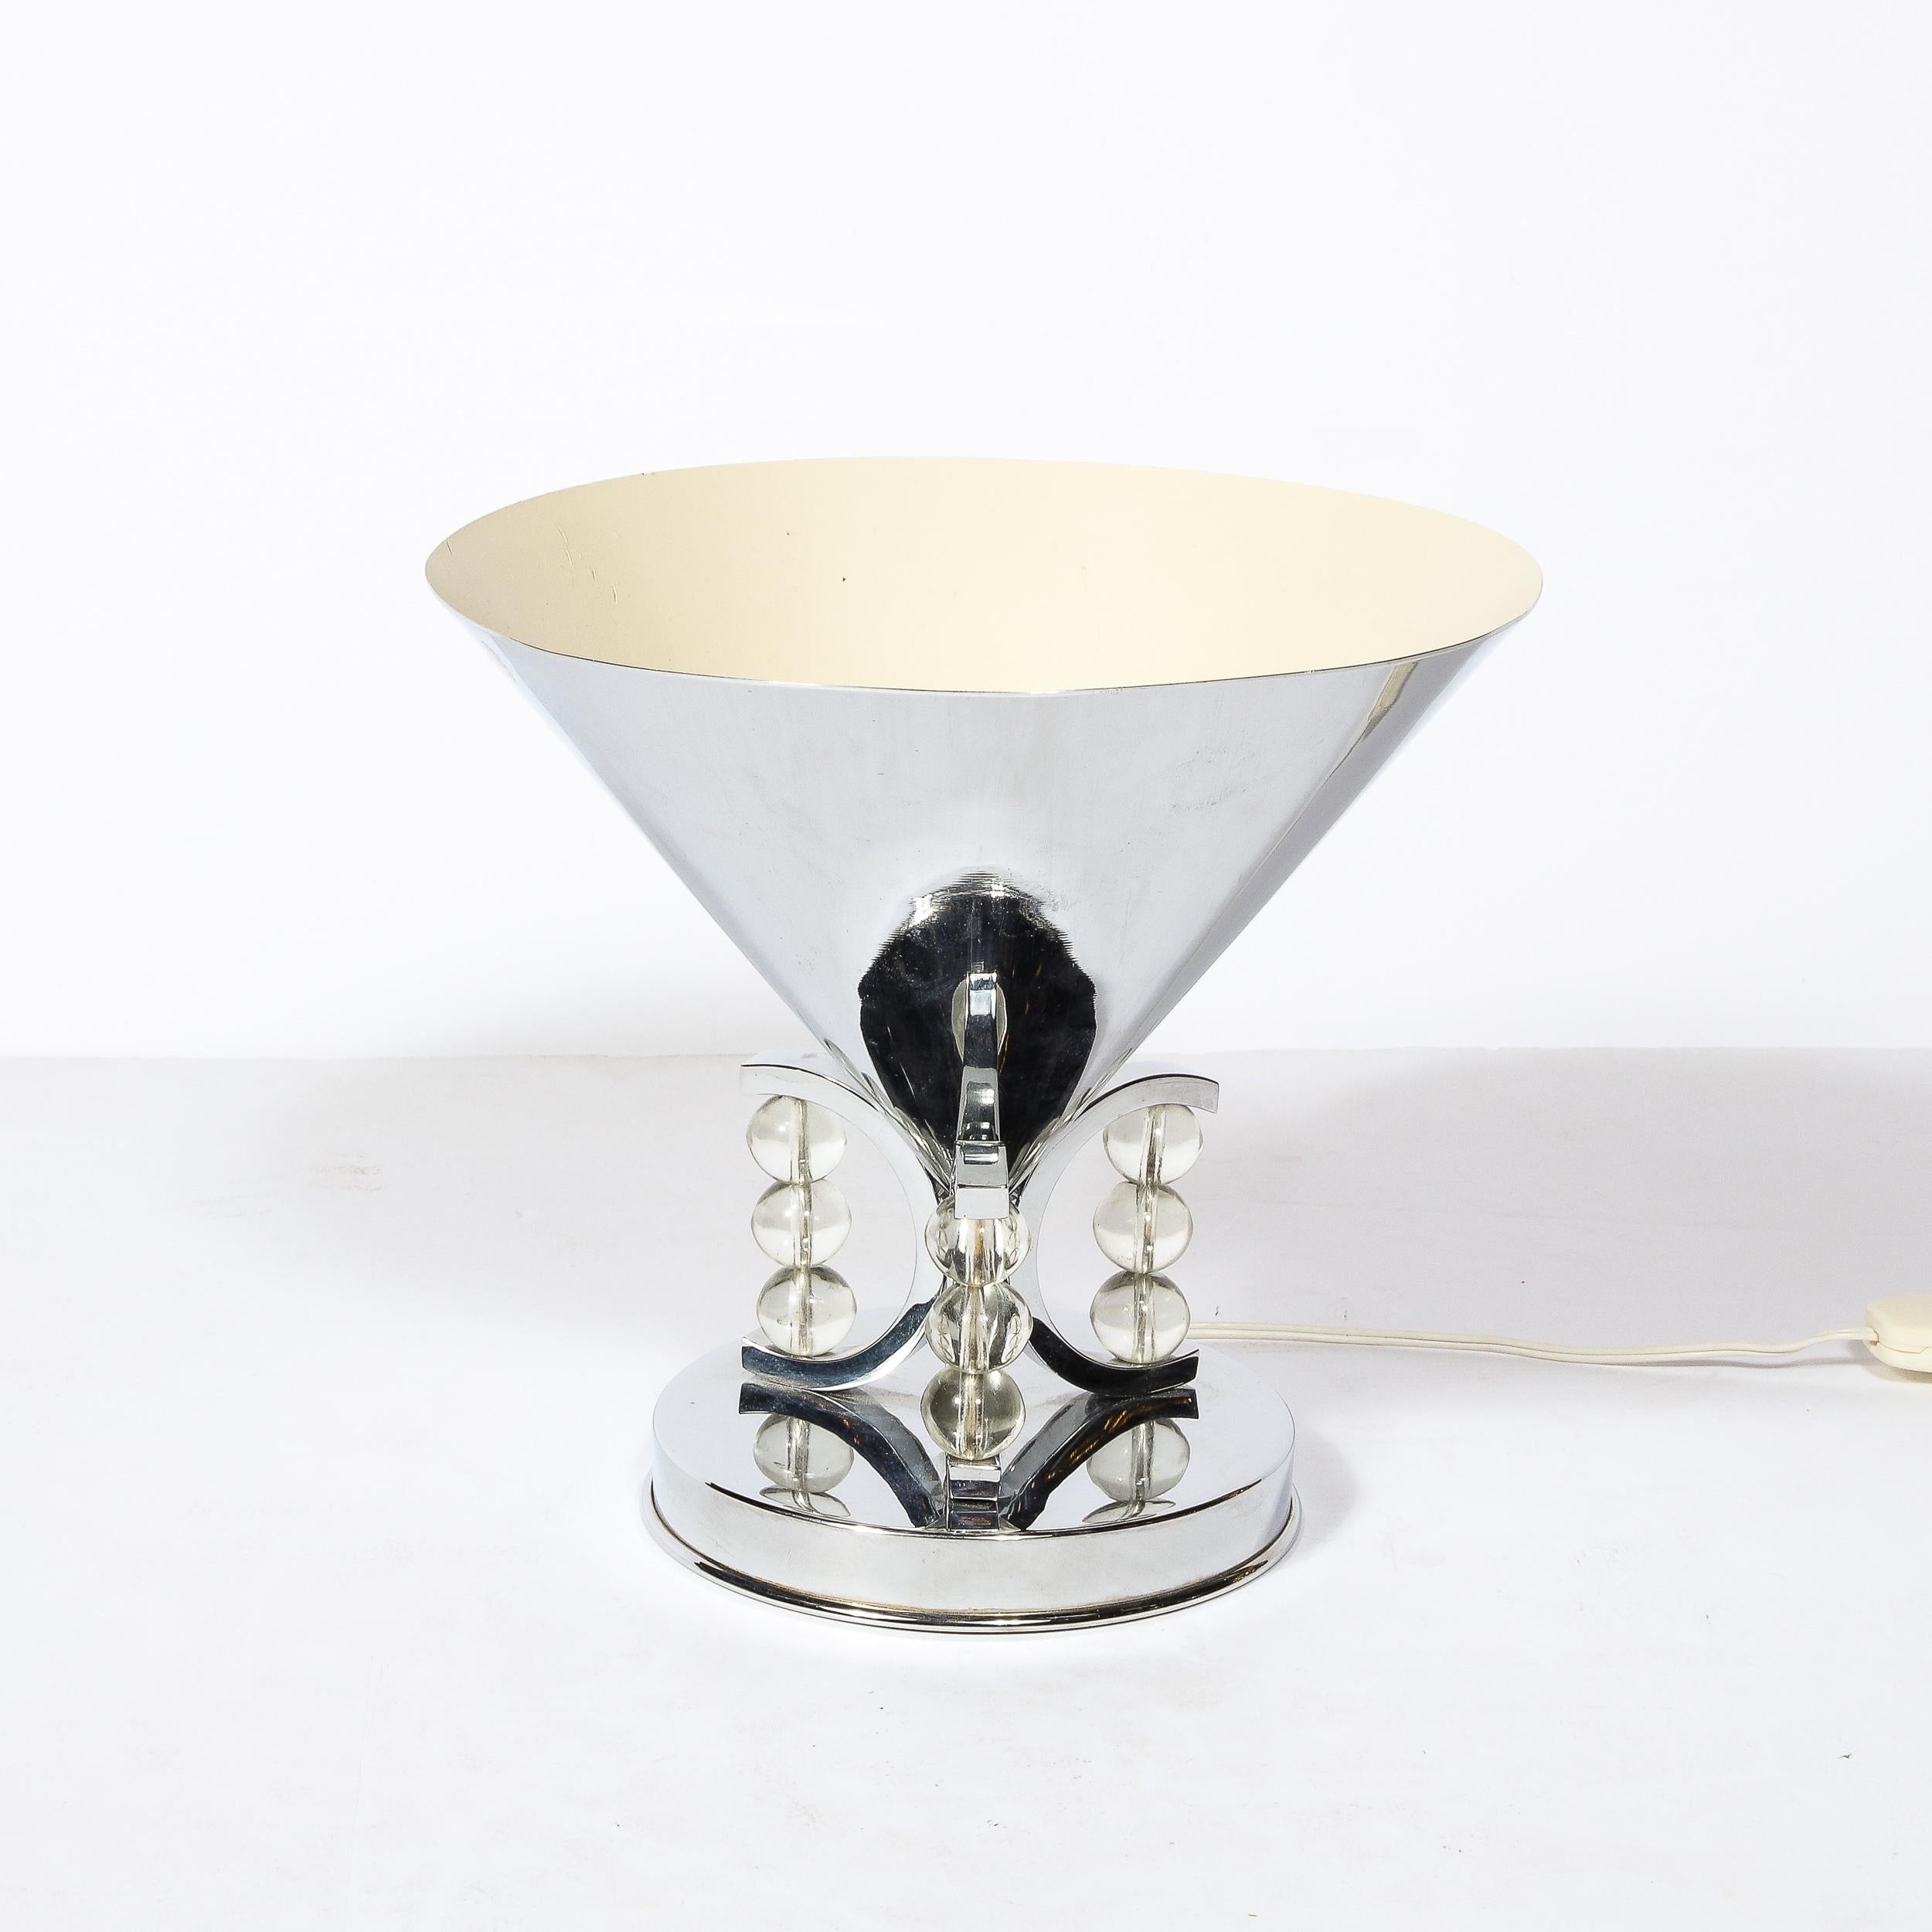 Art Deco Conical Uplight Table Lamp in Chrome with Stacked Glass Ball Detailing For Sale 3